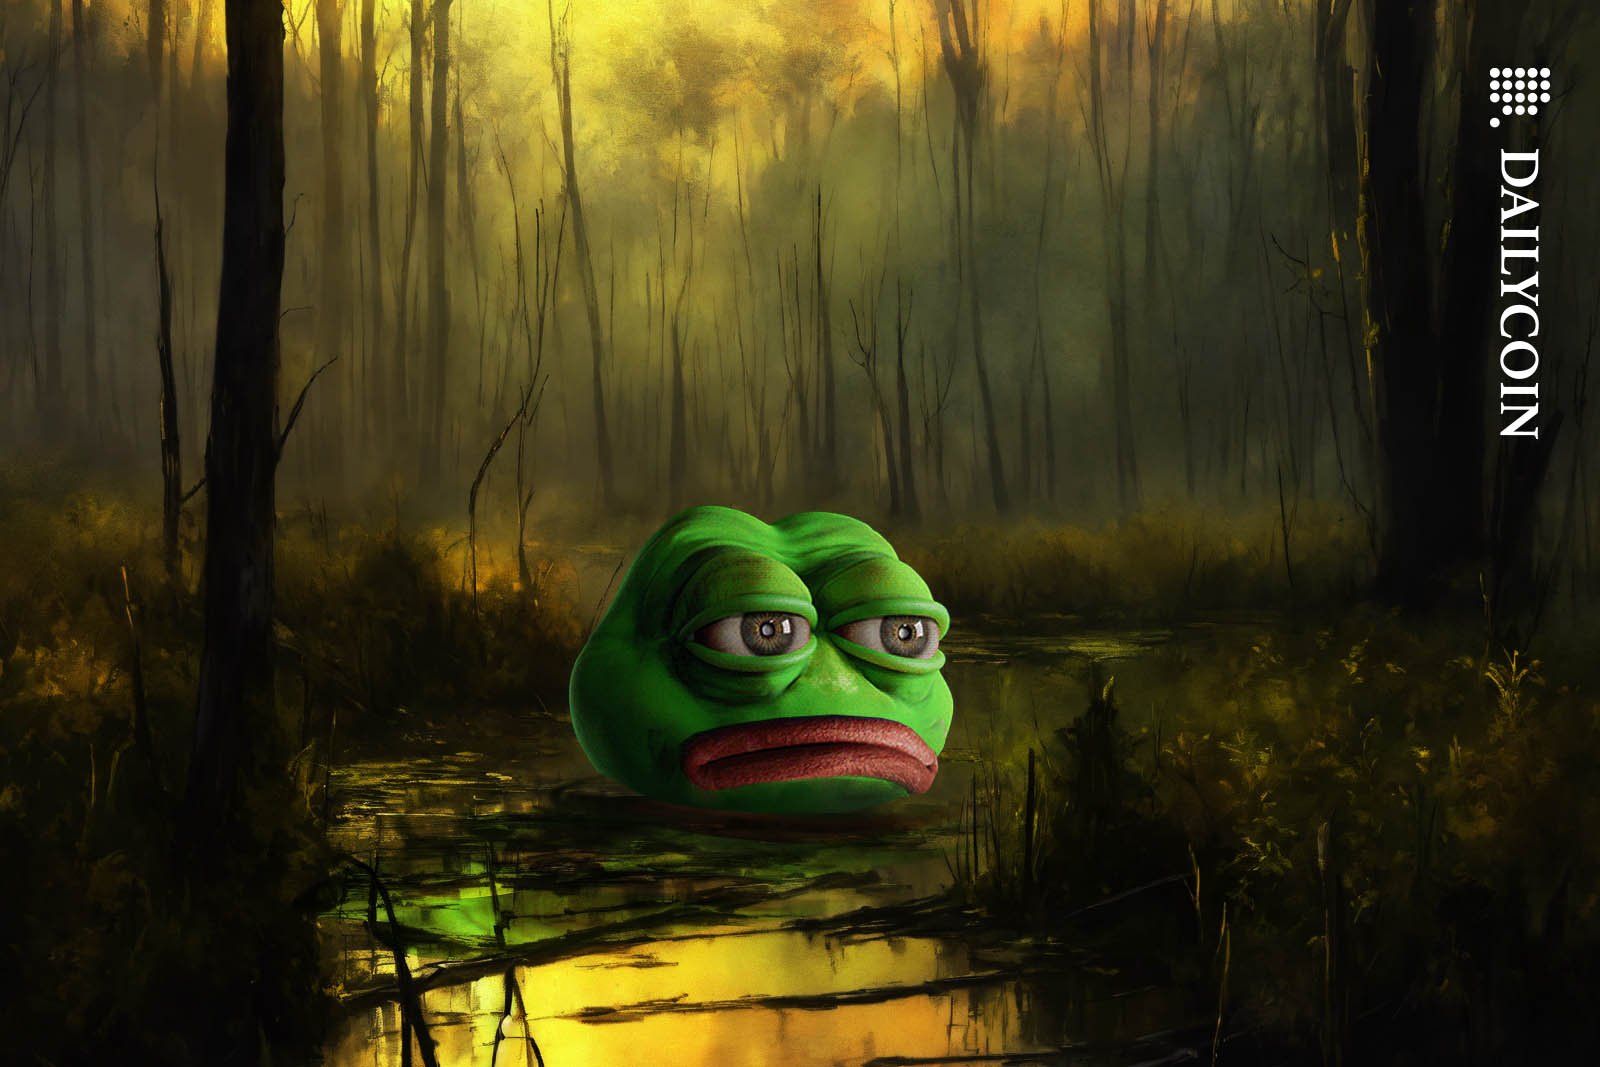 Pepe the frog emerged in a swamp neck deep, looking sad.